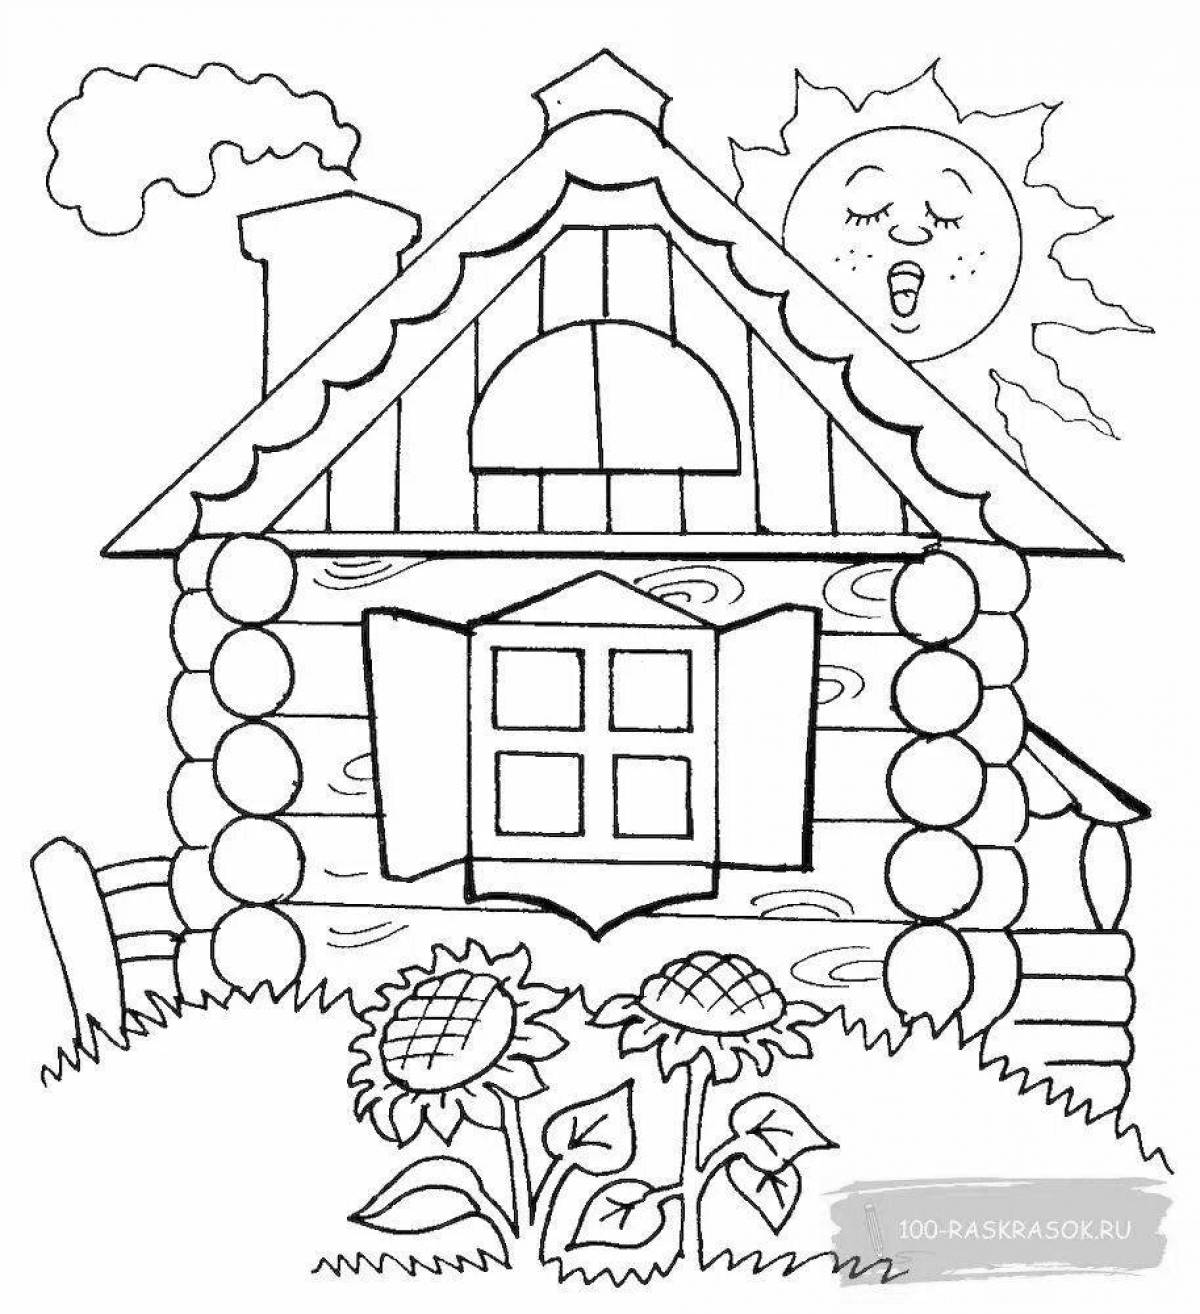 Coloring page rustic wooden hut